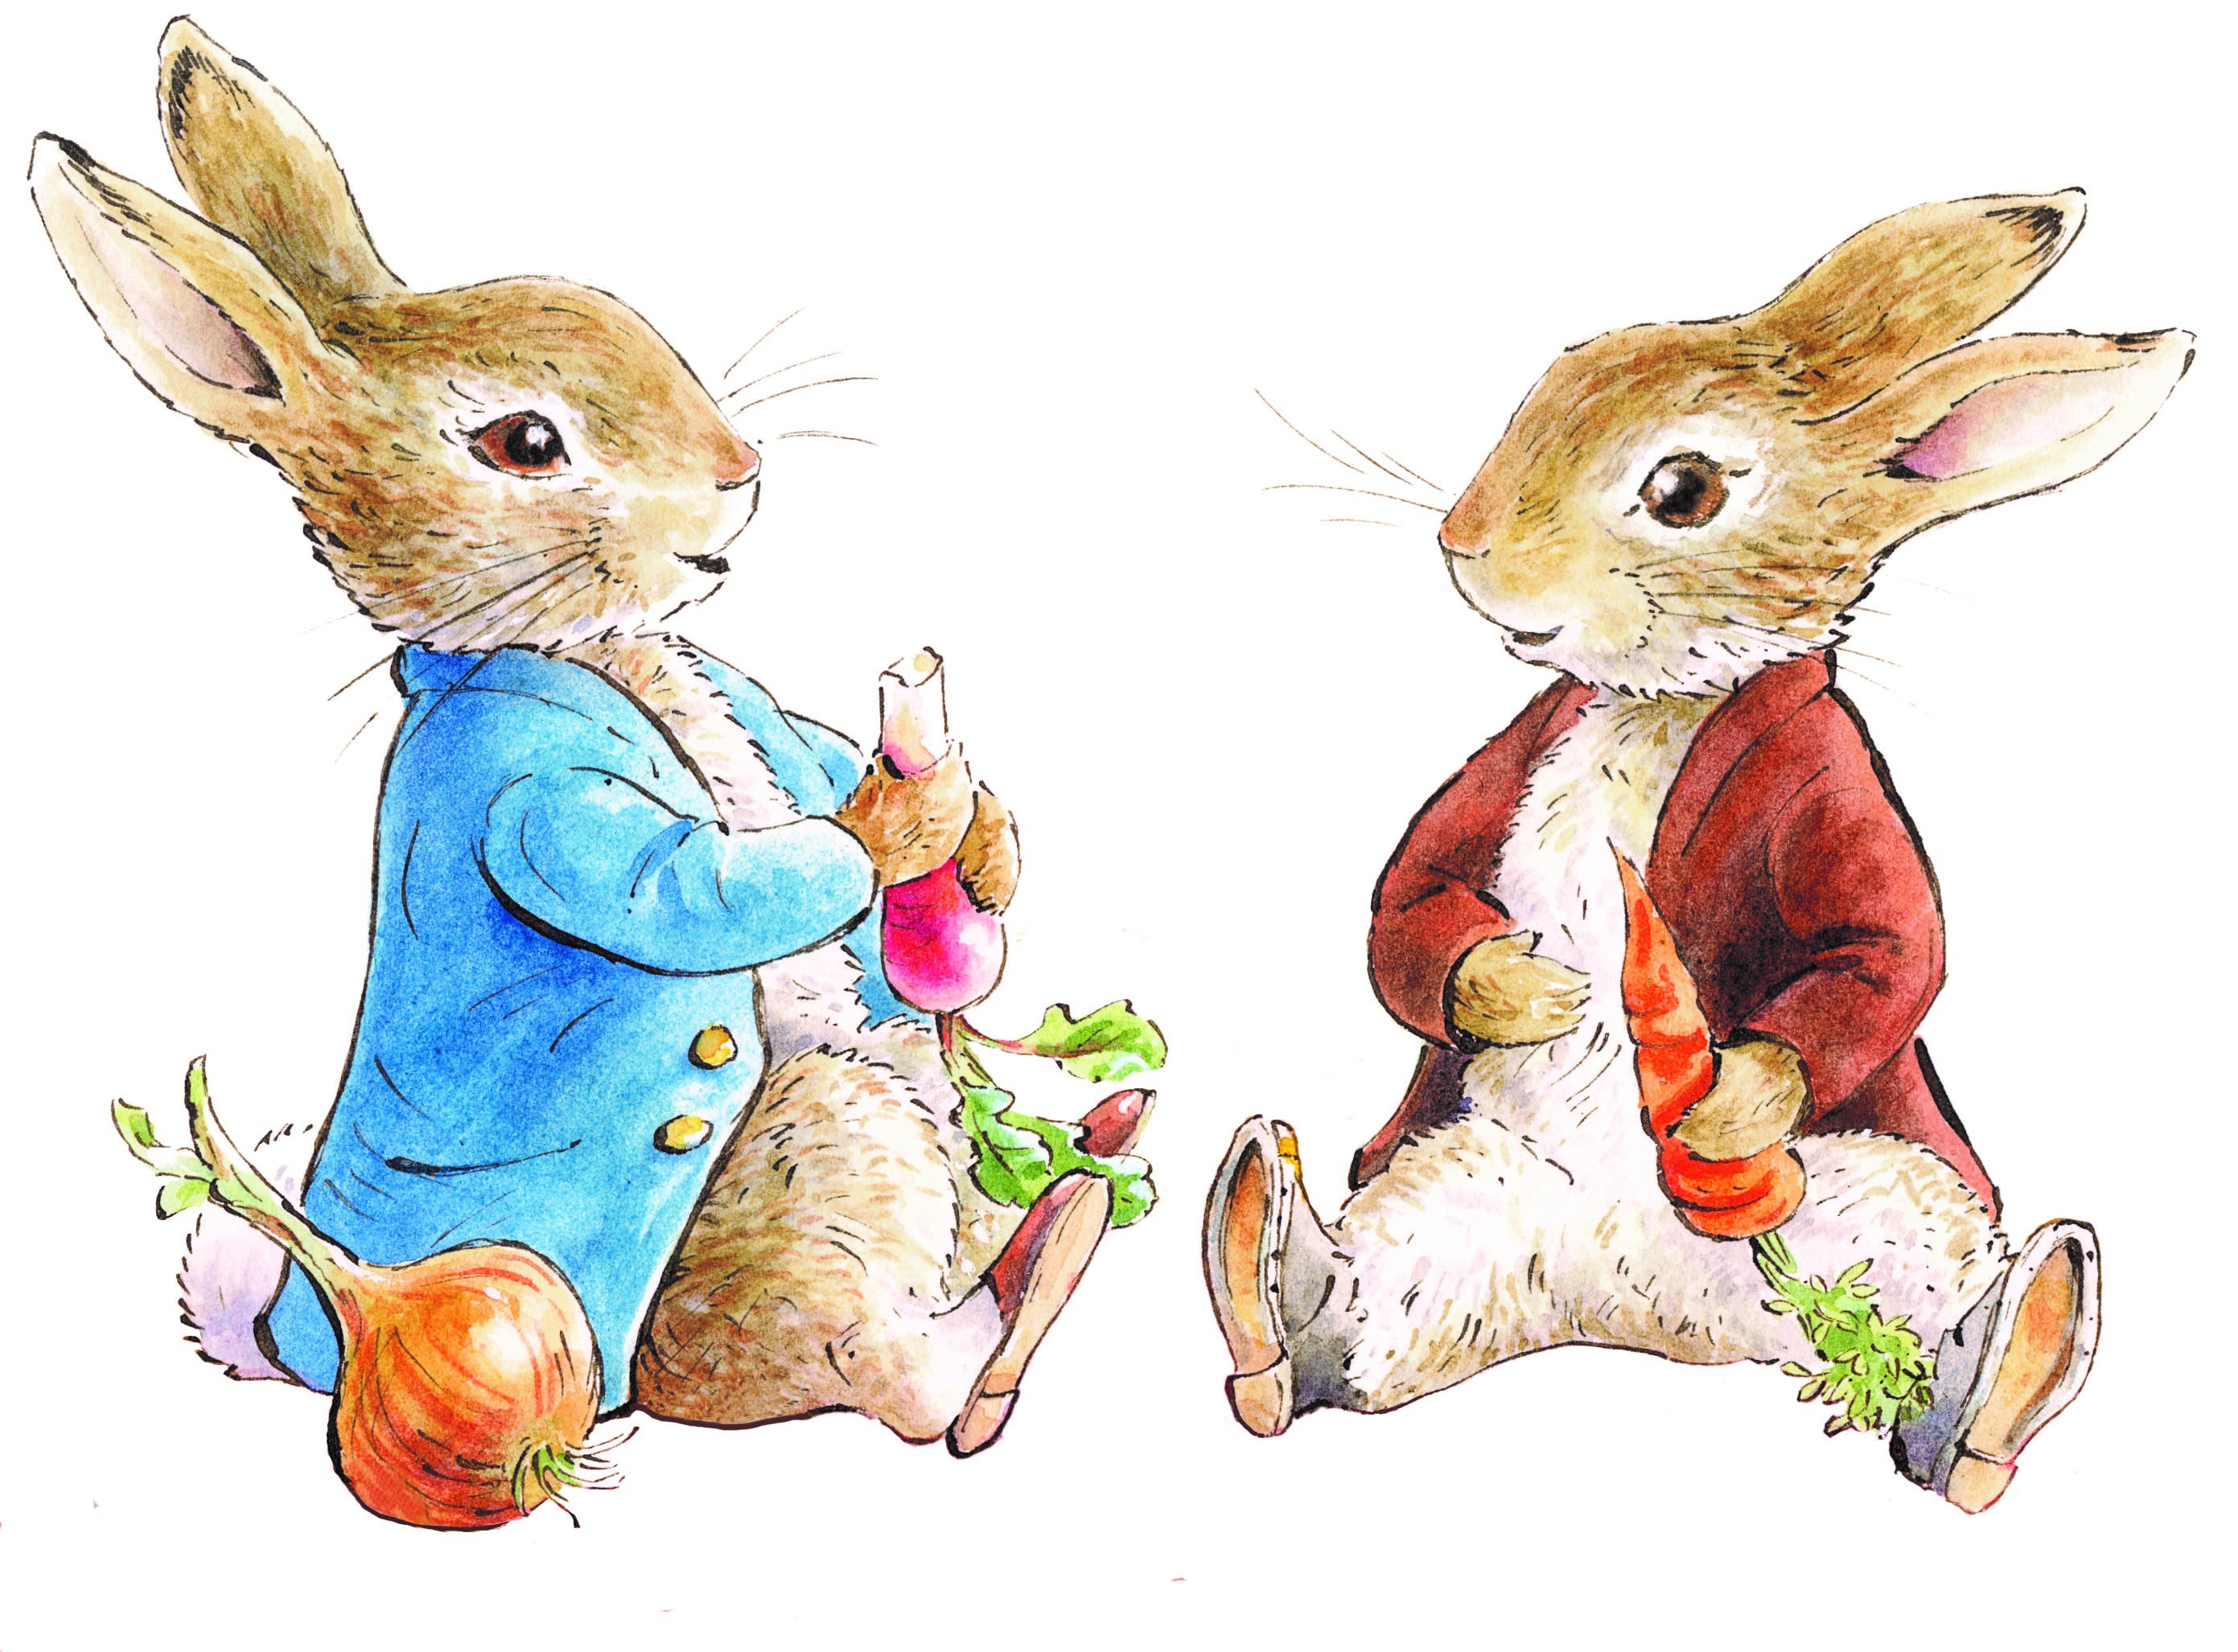 Grow with Peter Rabbit' initiative launched to get kids gardening